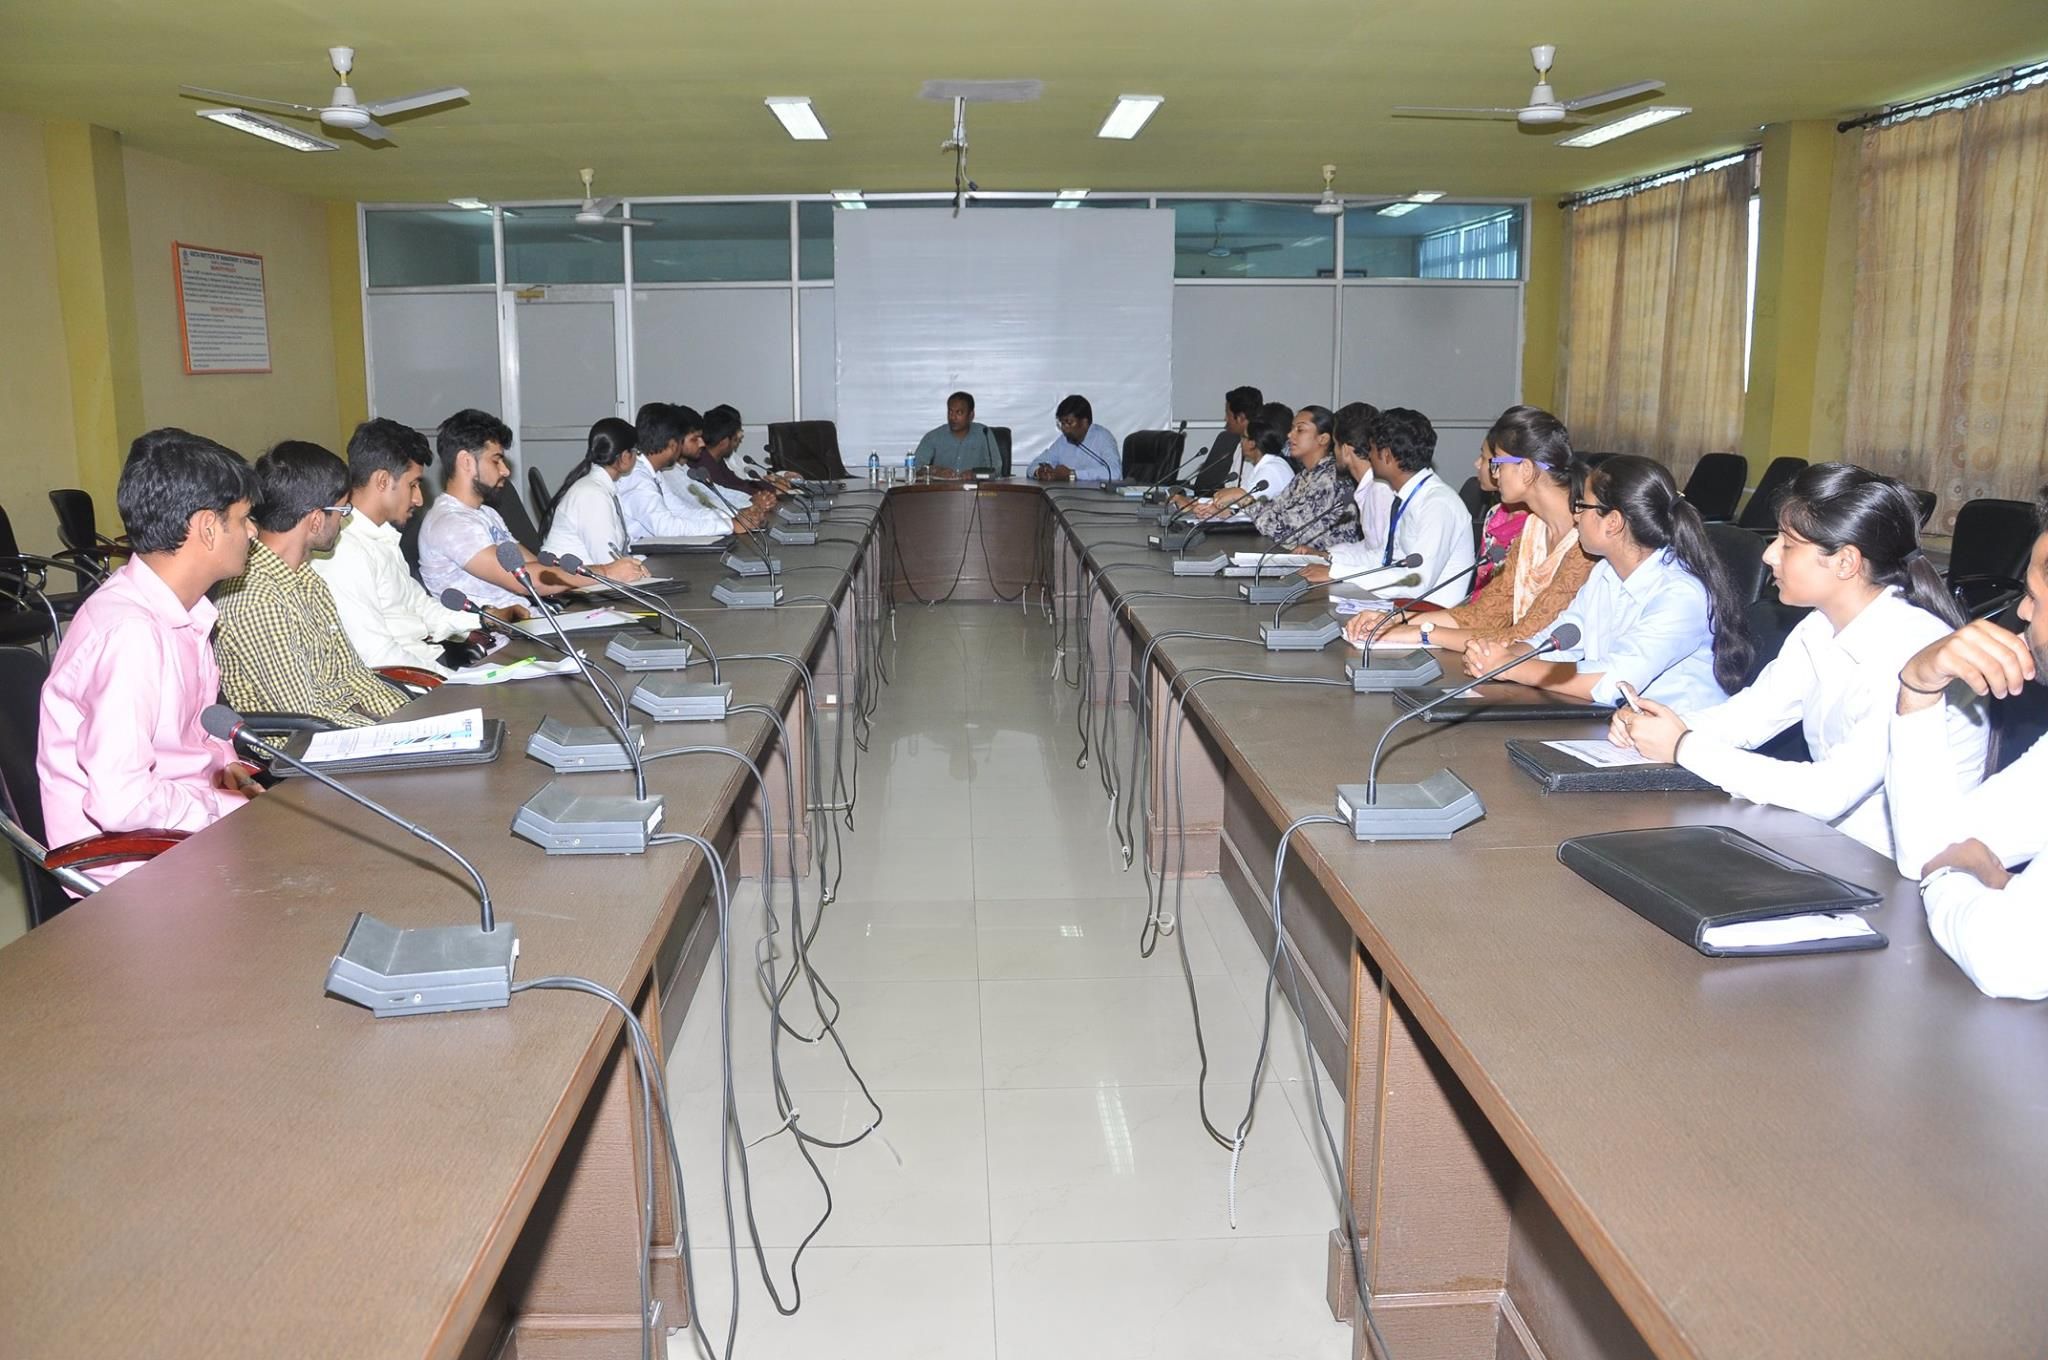 GIMT - Geeta Institute of Management And Technology Seminar hall